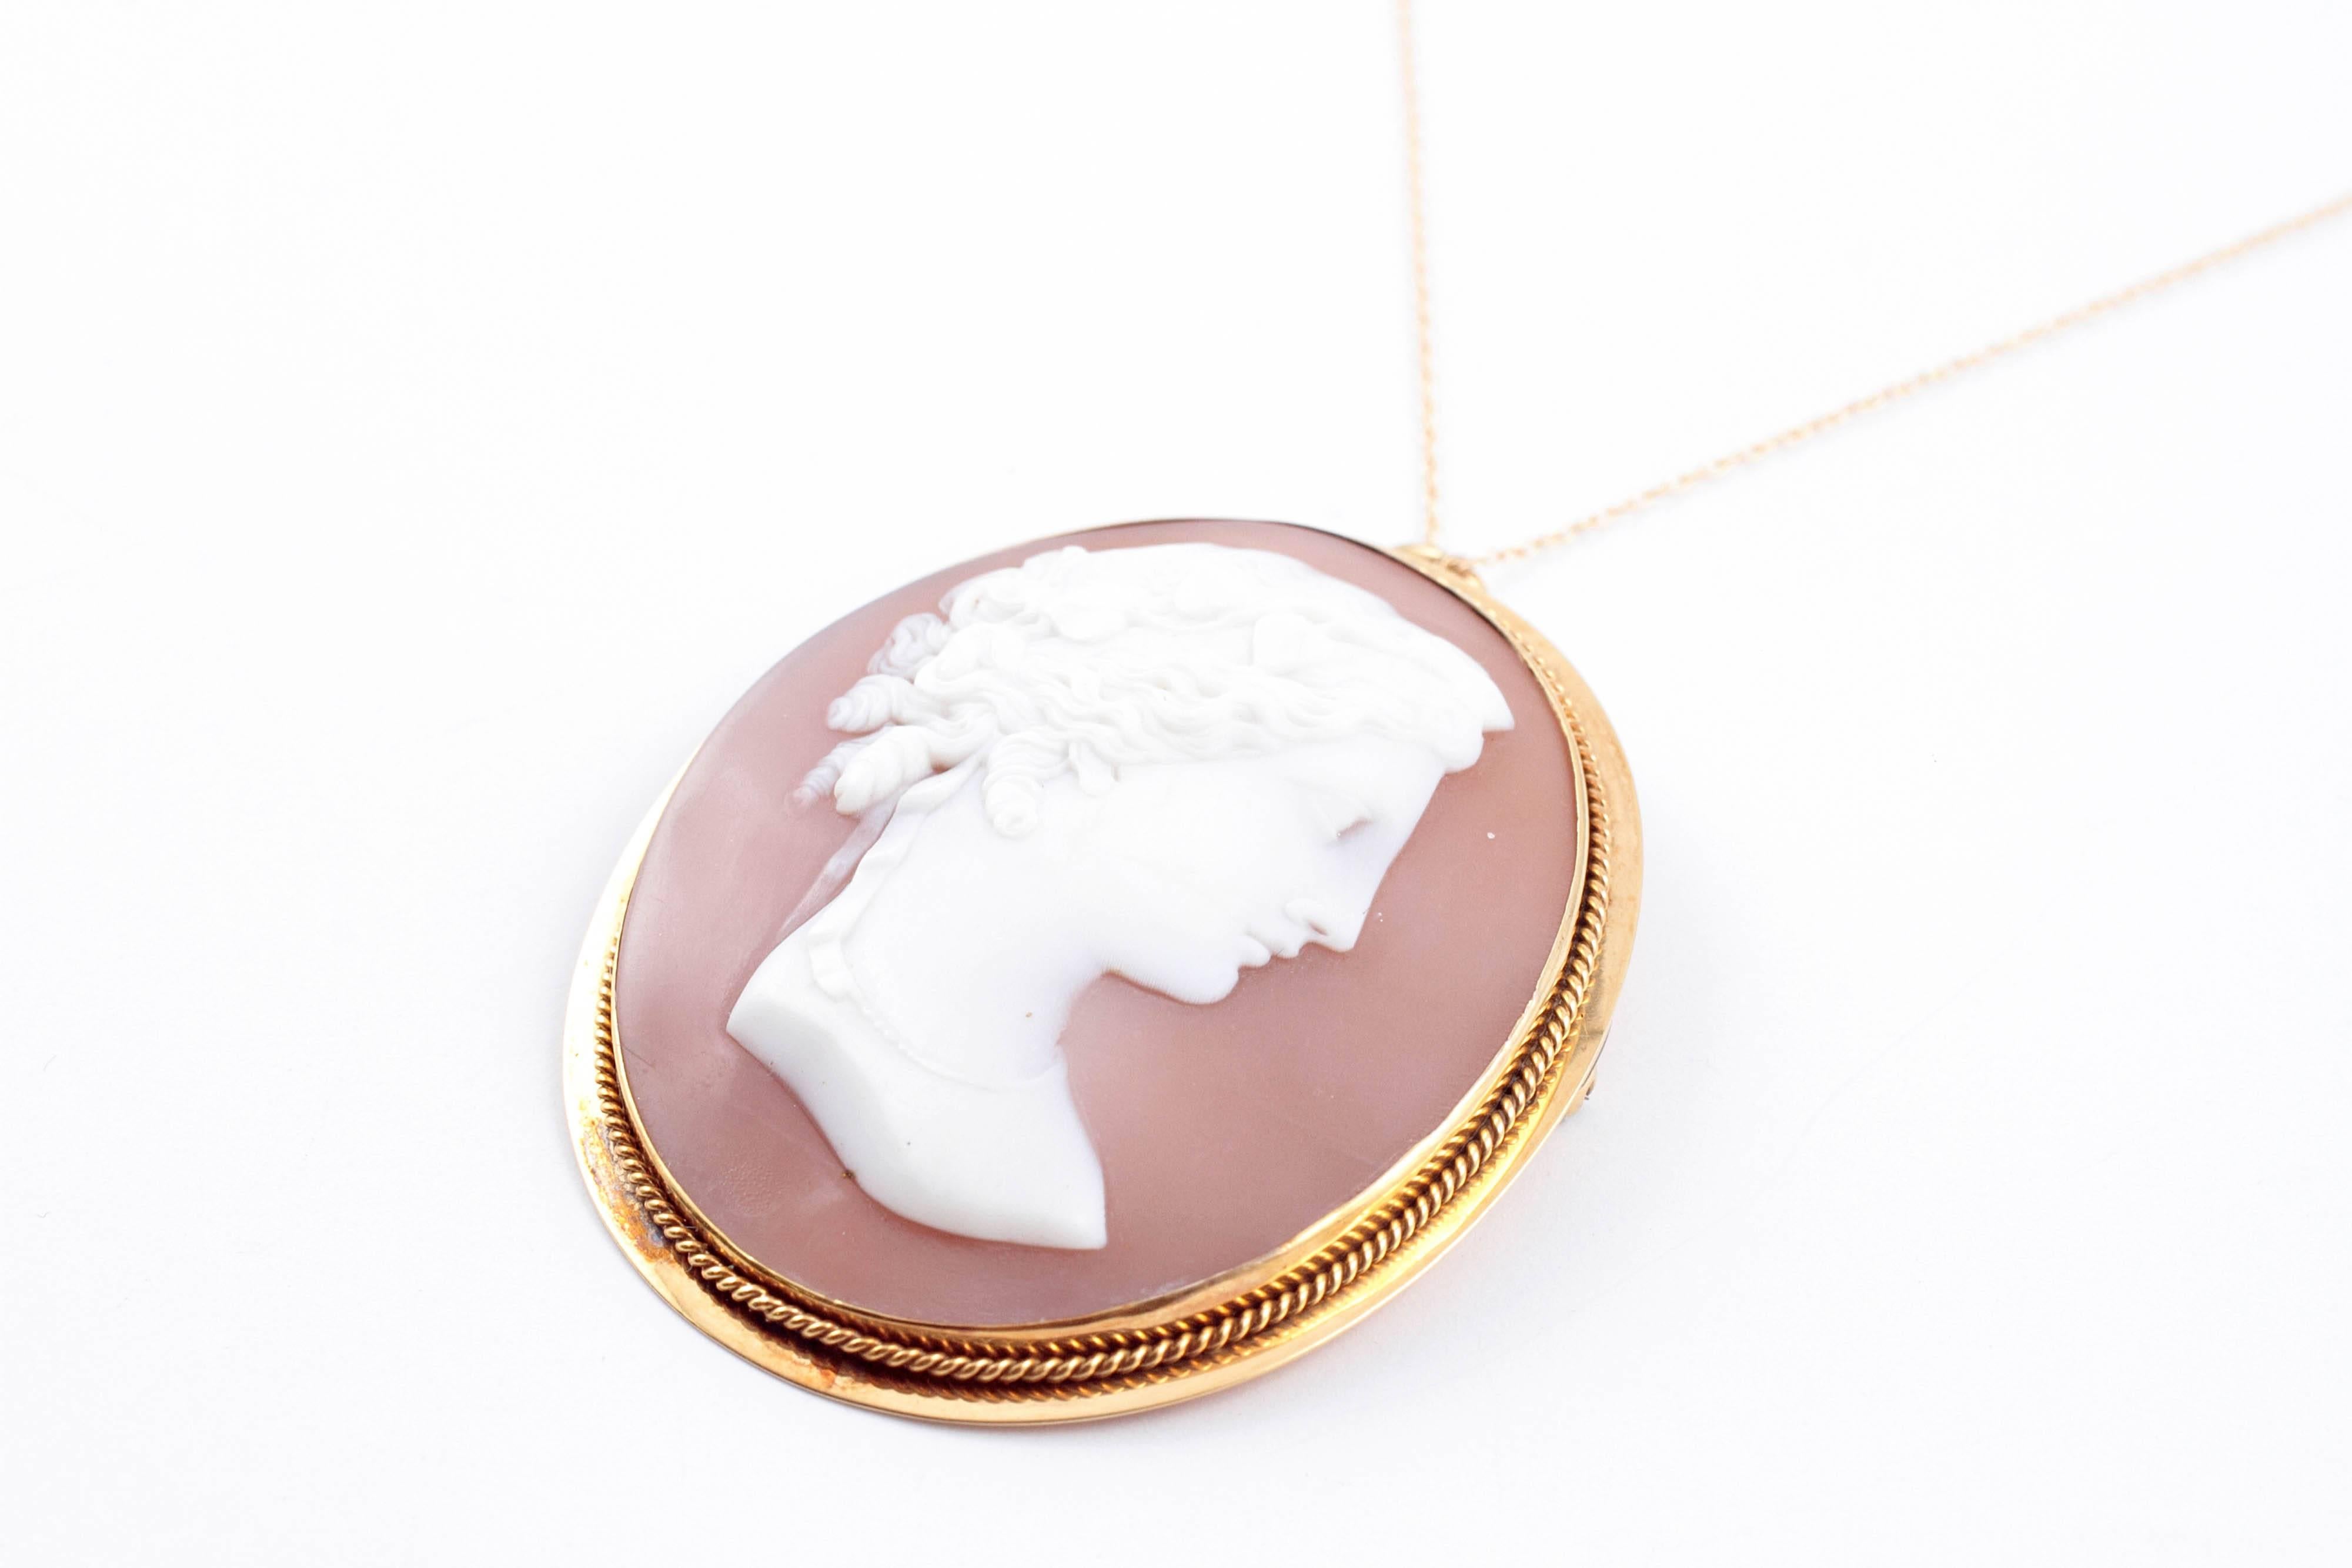 Large Shell Cameo Brooch Pendant on Yellow Gold Filled Chain In Good Condition For Sale In Dallas, TX